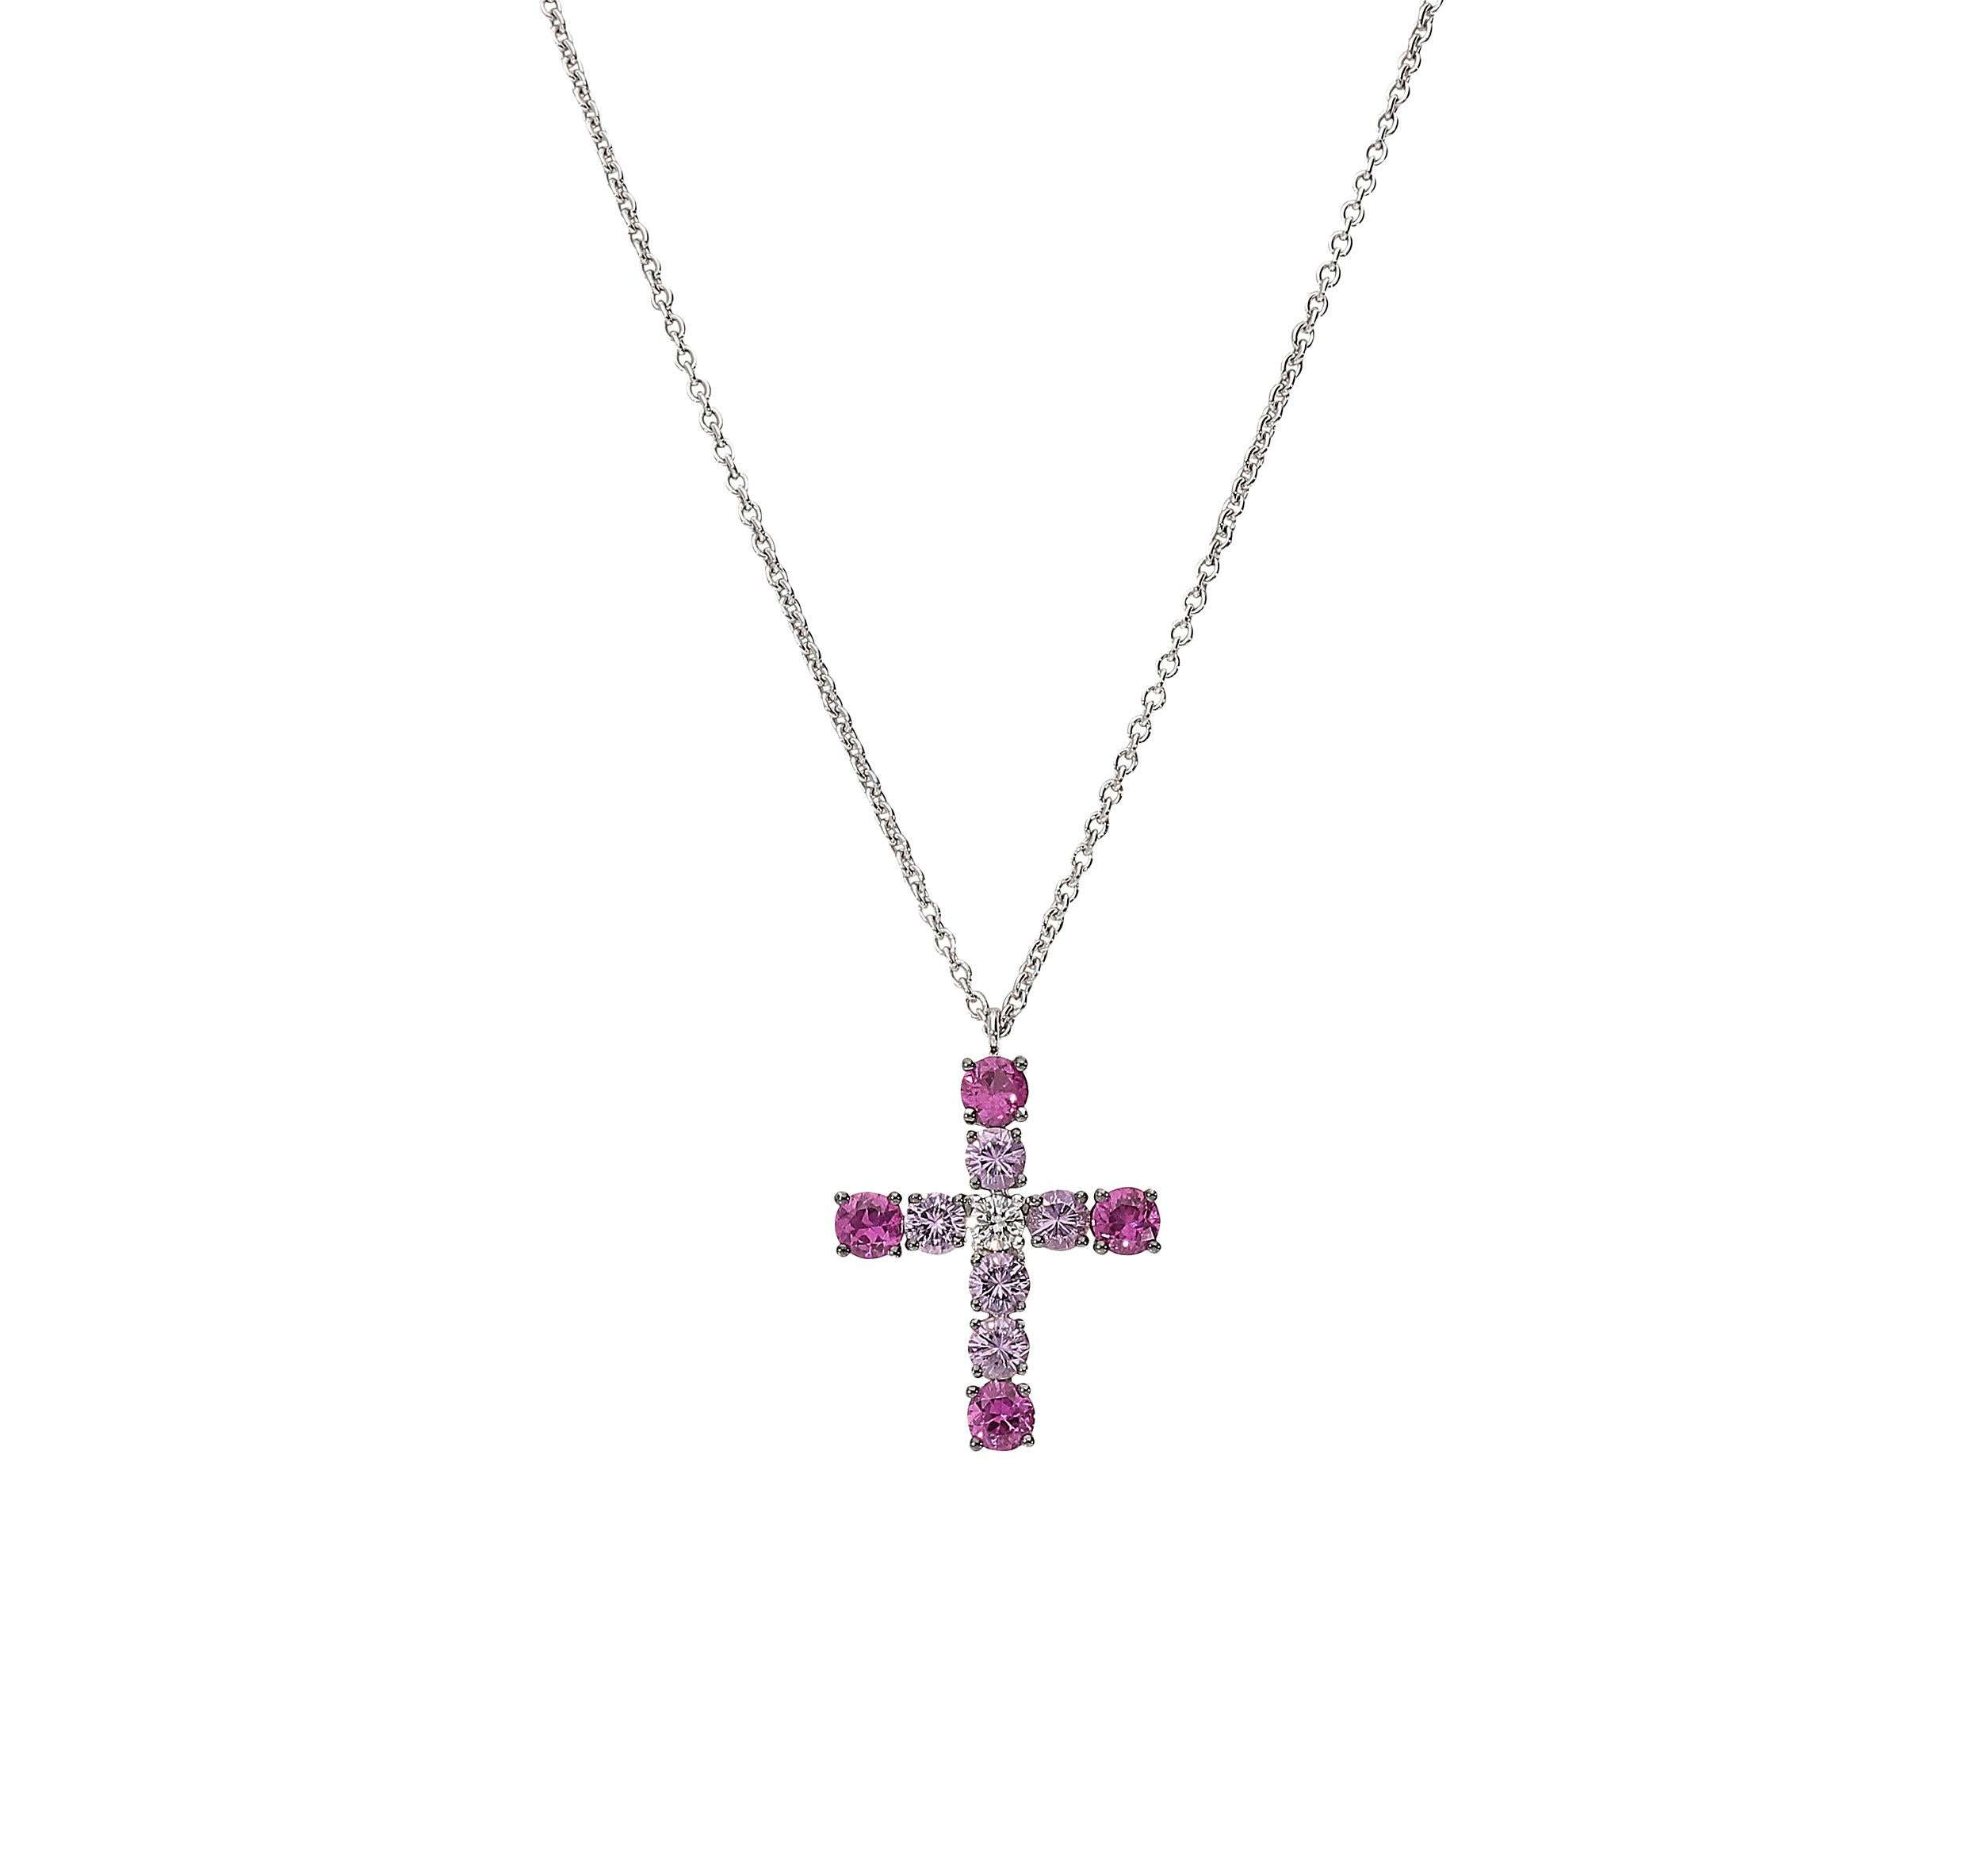 Sophisticated cross with 42 centimeters chain in 18kt white gold for a grand total of 5,60 grams.
At the apexes there are 4 wonderful rubies with dark fuchsia nuance for 0,95 carat, then 5 pink sapphires for 0,96 carat and a central white round